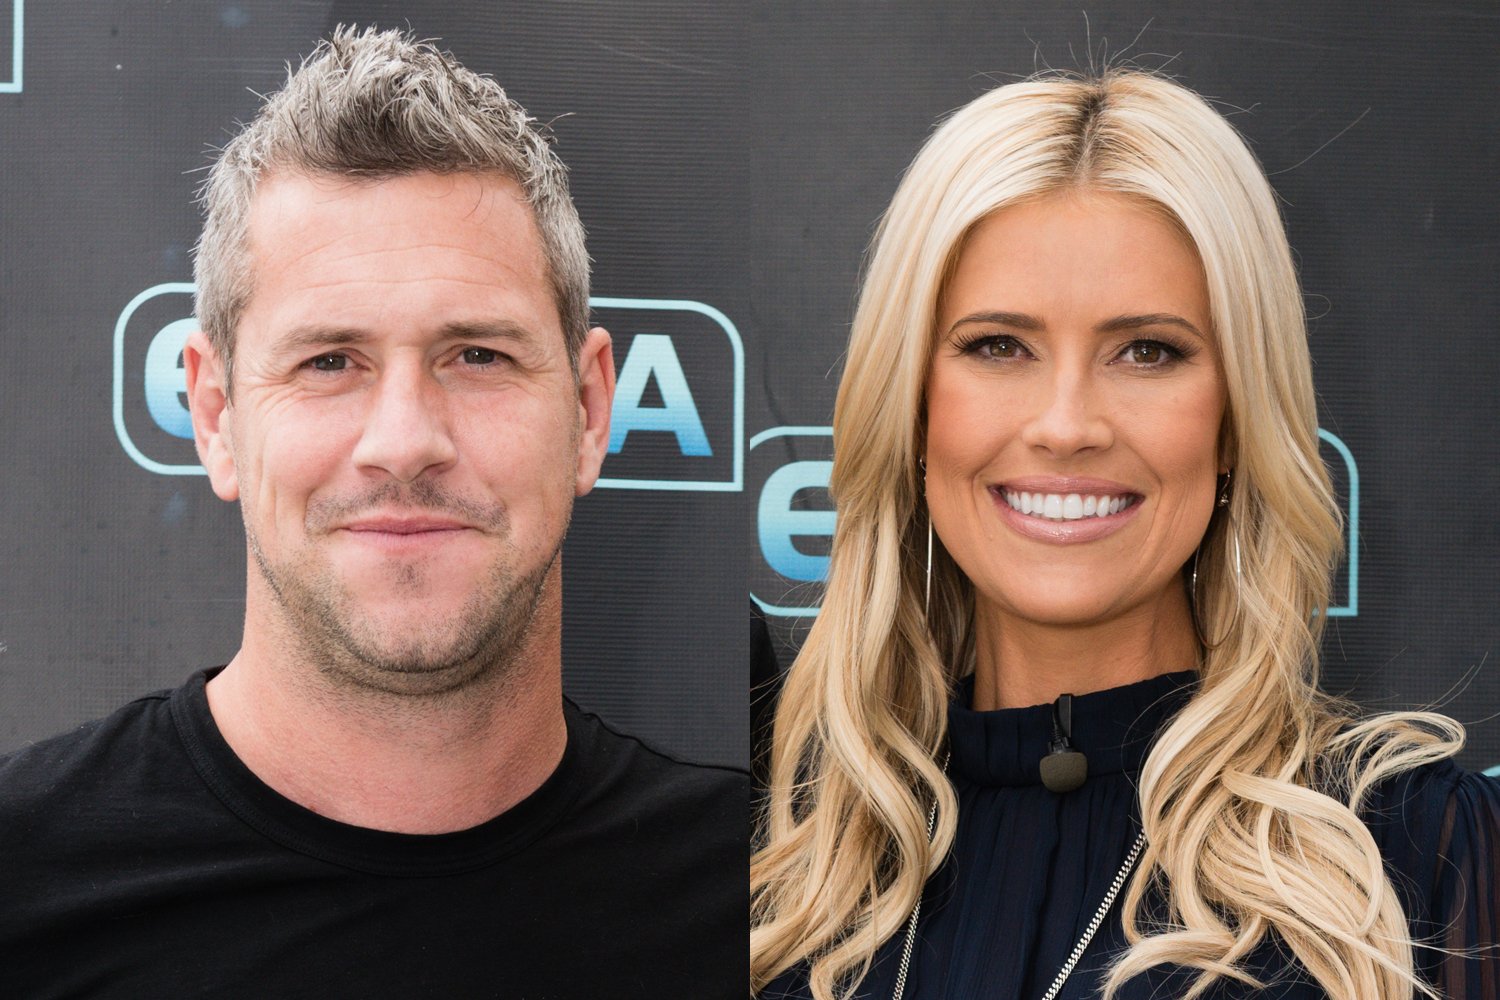 Ant Anstead and Christina Haack when they were married in 2019